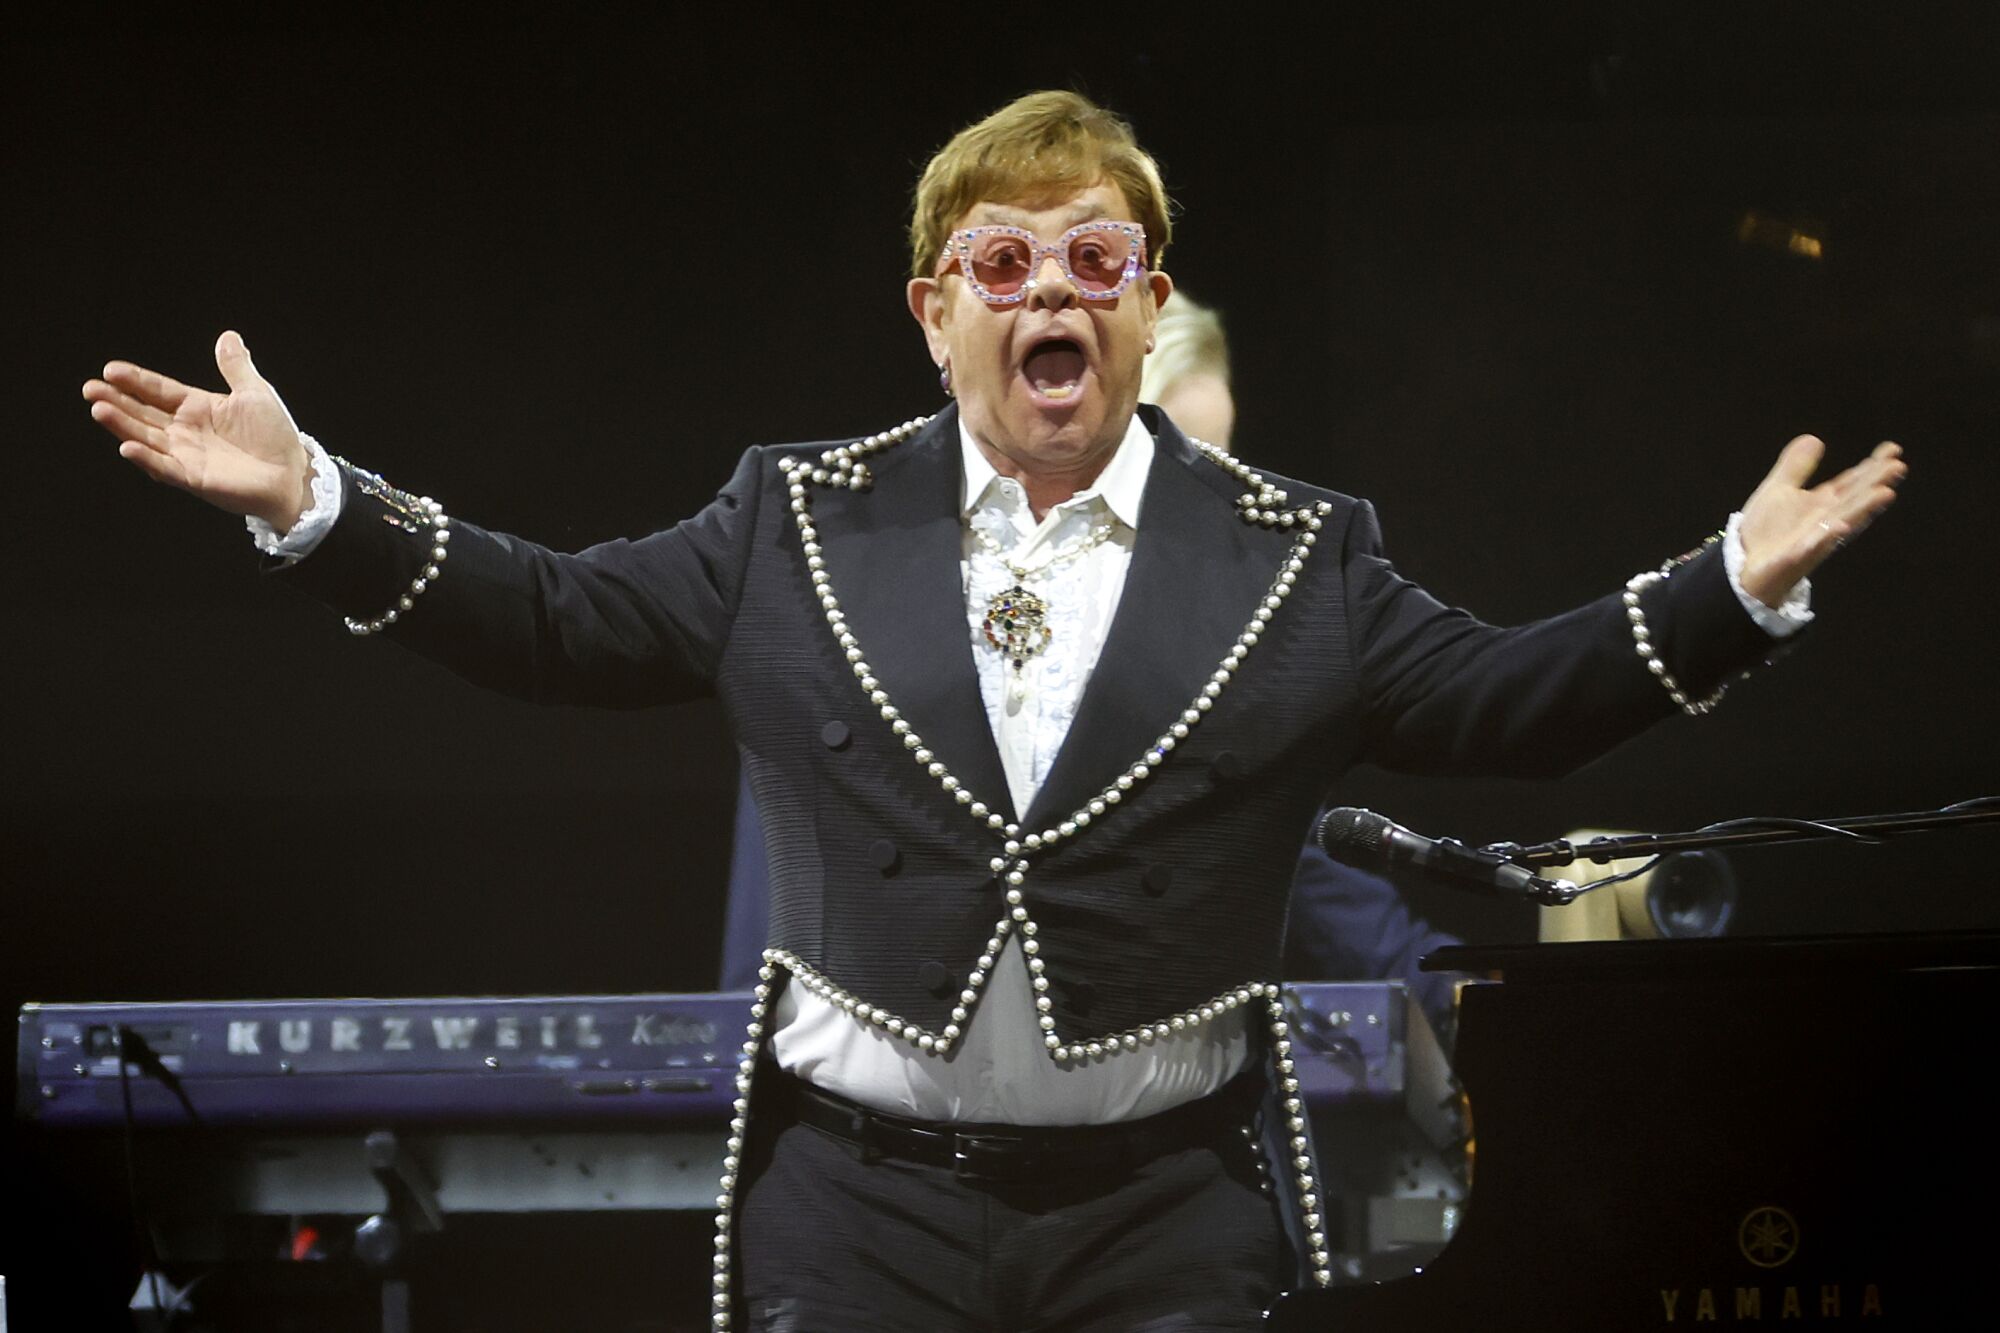 Elton John performed during his "Farewell Yellow Brick Road: The Final Tour" 